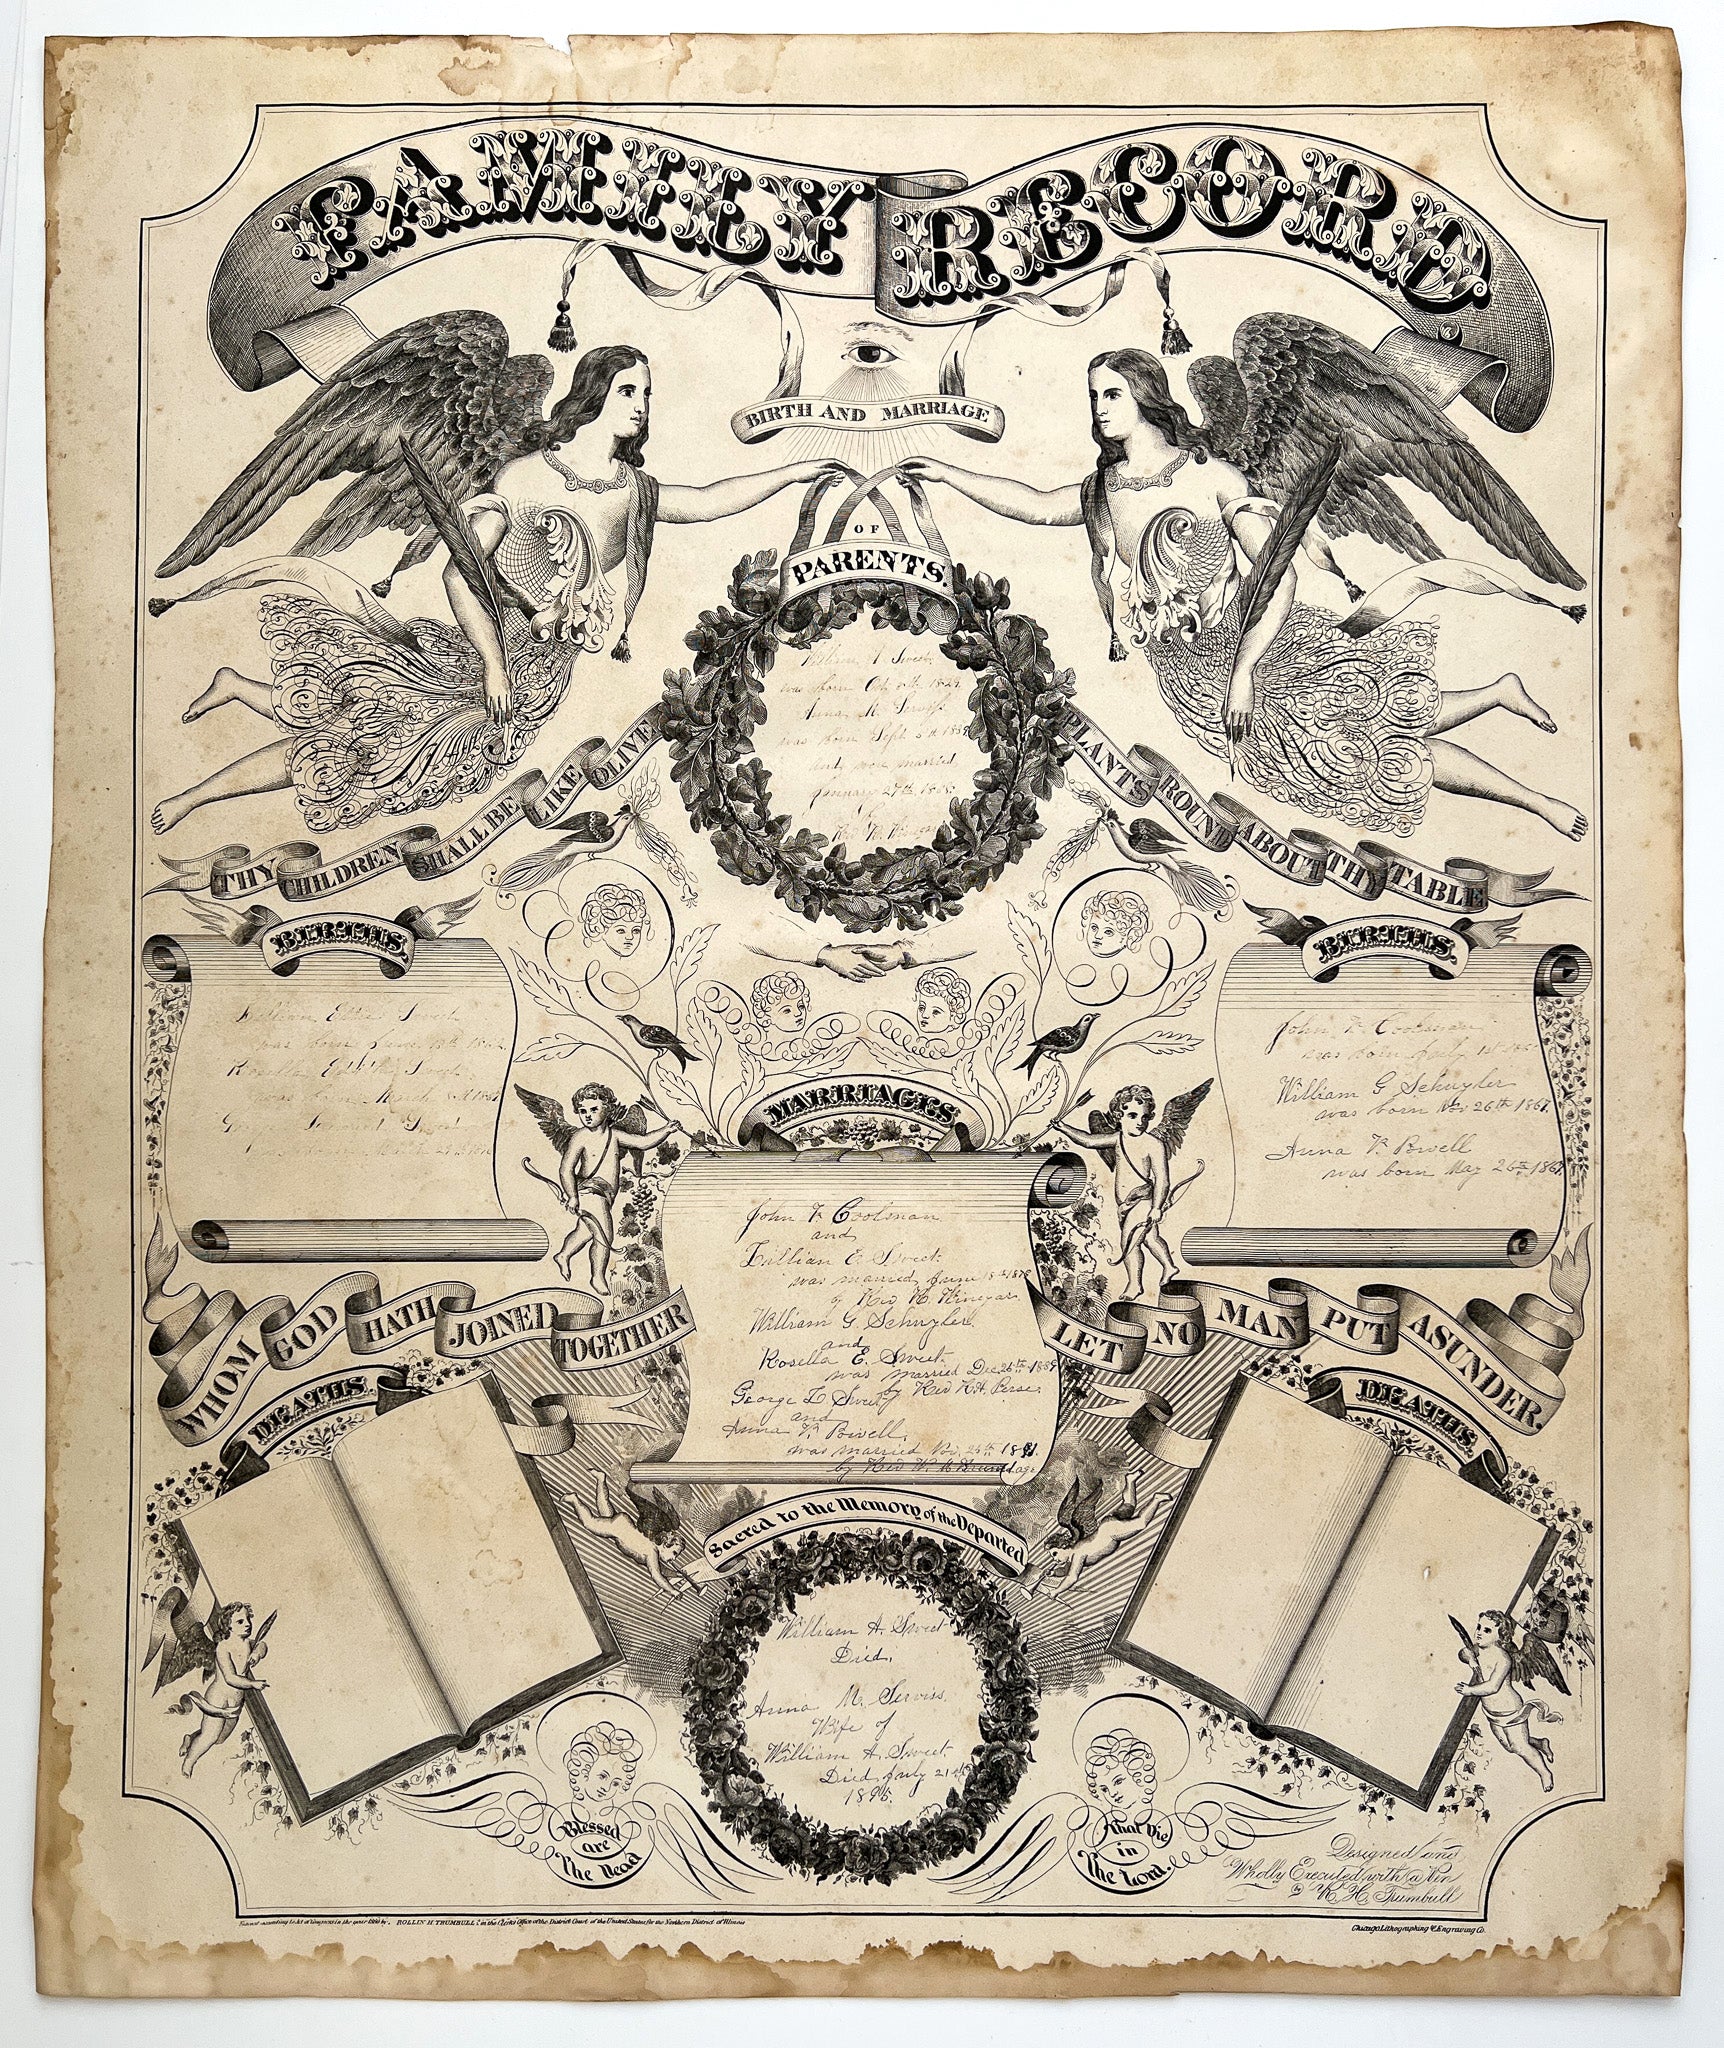 Family Record - large ornate lithograph with calligraphy